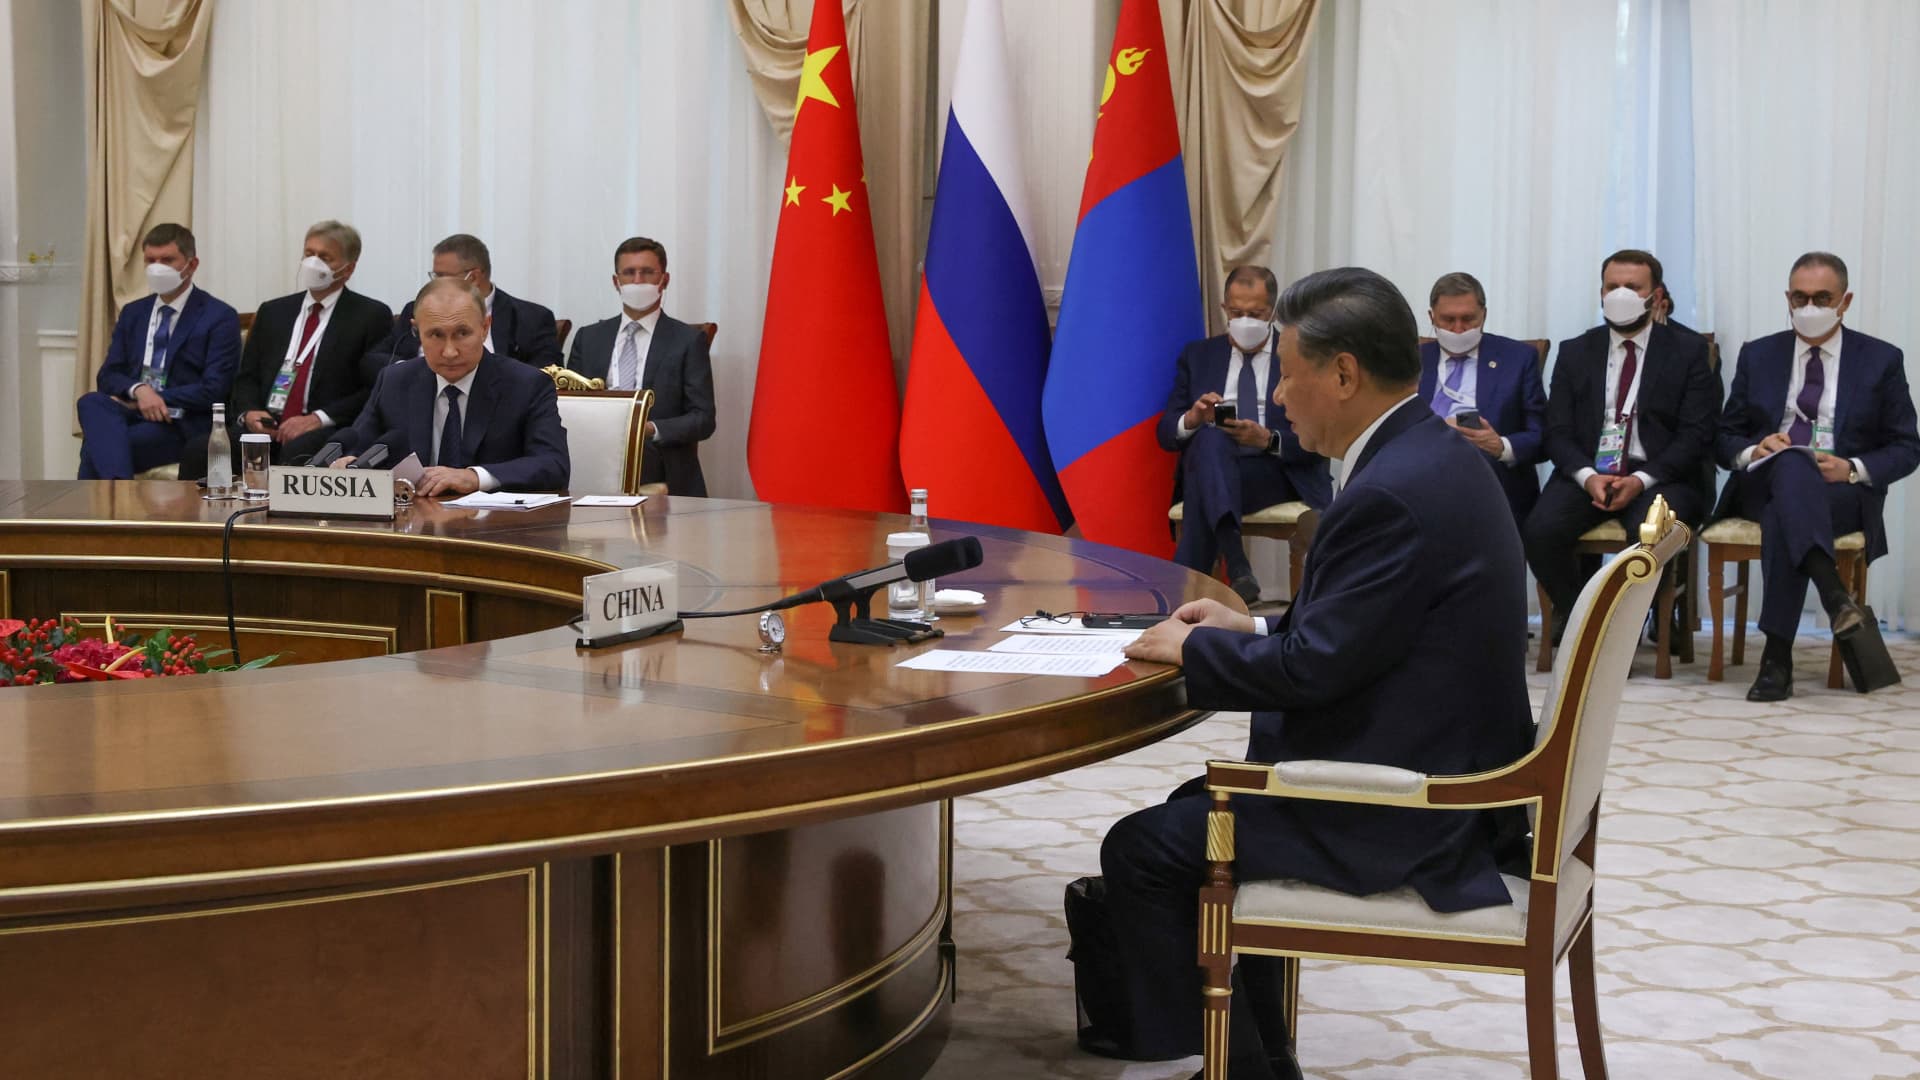 China's President Xi Jinping (R), Russian President Vladimir Putin (L) and Mongolia's President Ukhnaa Khurelsukh (unseen) hold a trilateral meeting on the sidelines of the Shanghai Cooperation Organisation (SCO) leaders' summit in Samarkand on September 15, 2022. China and Russia's relationship may not necessarily be on equal footing, said an associate professor from Griffith University, Matthew Sussex.